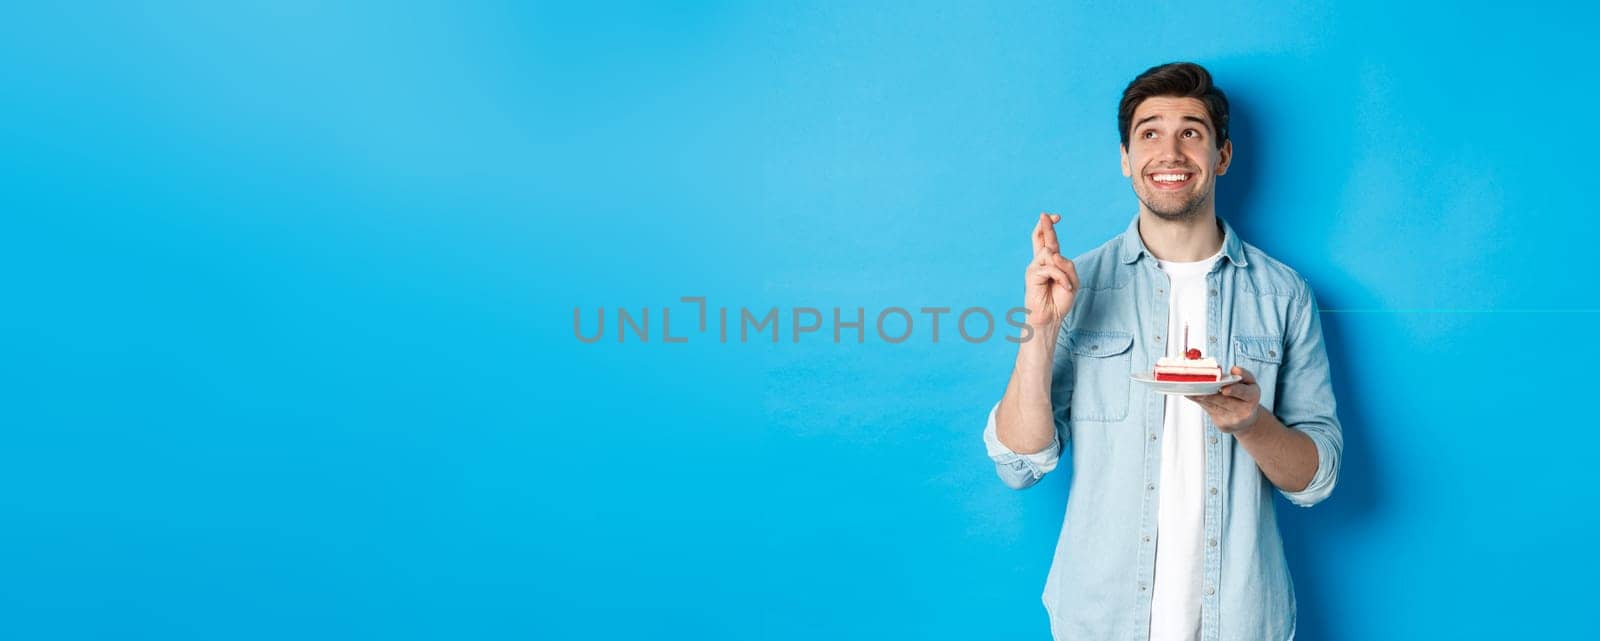 Handsome man making a wish, celebrating birthday, holding b-day cake and cross fingers, standing over blue background.